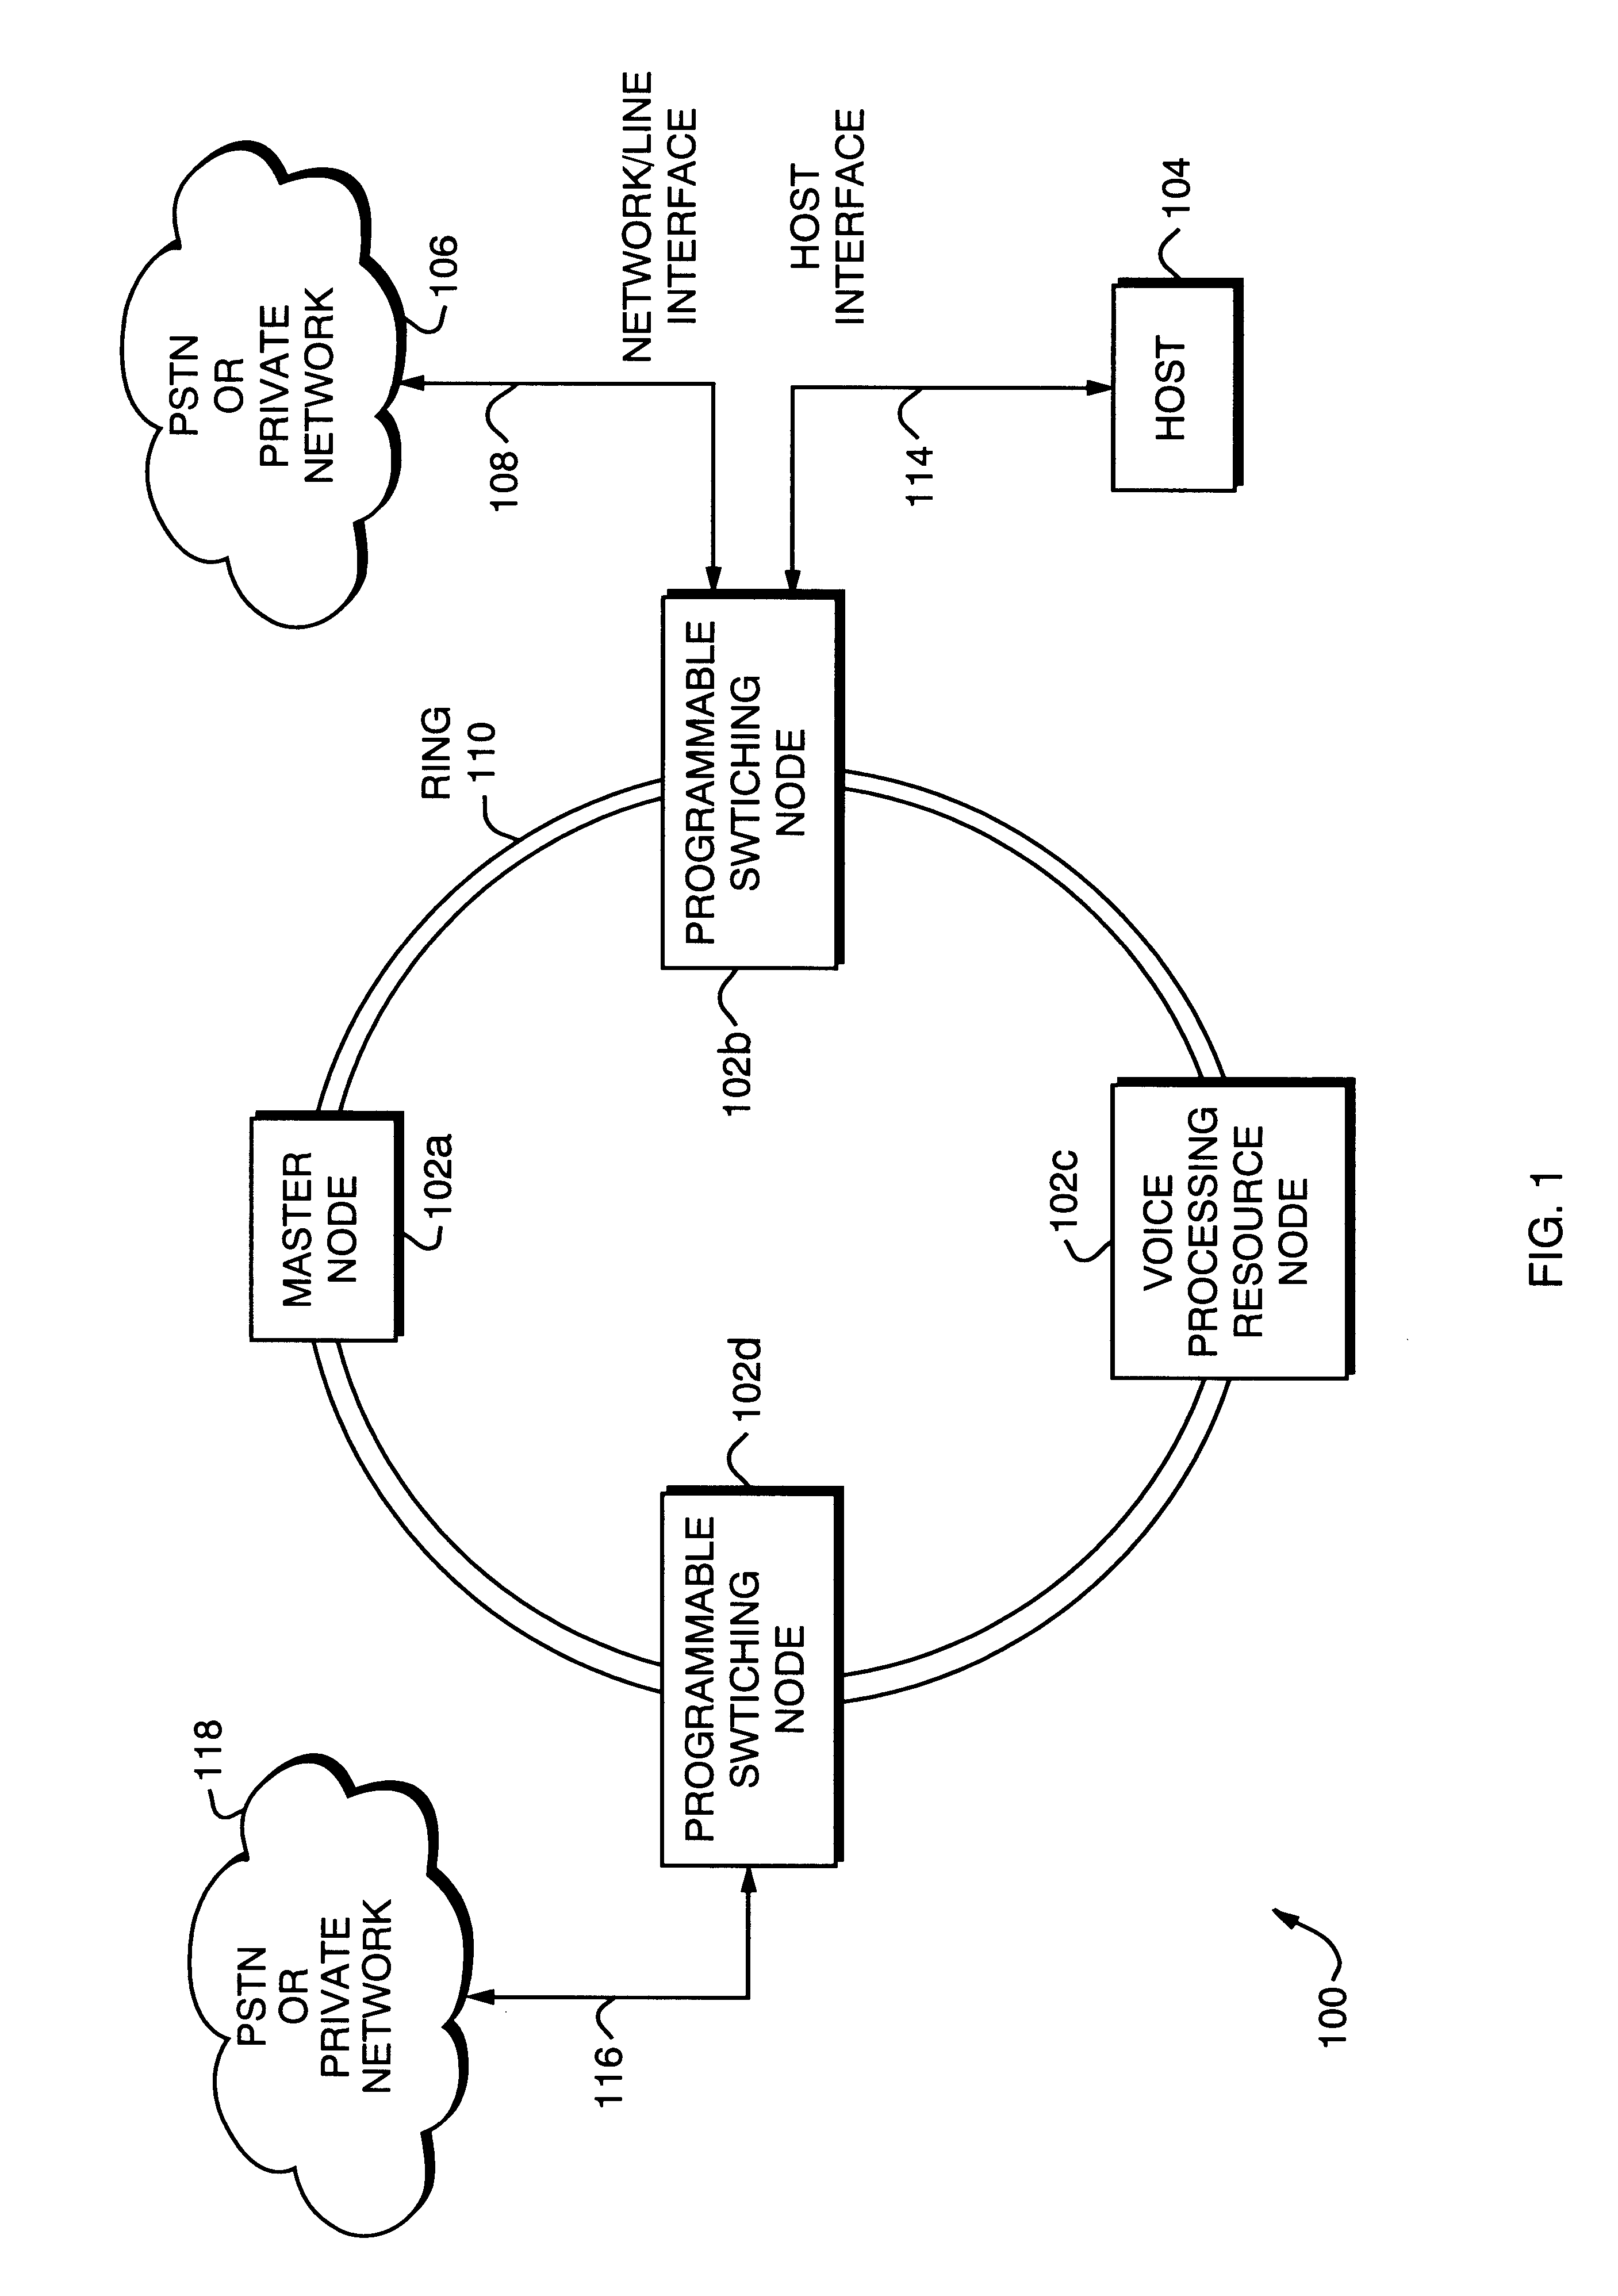 Distributed network synchronization system